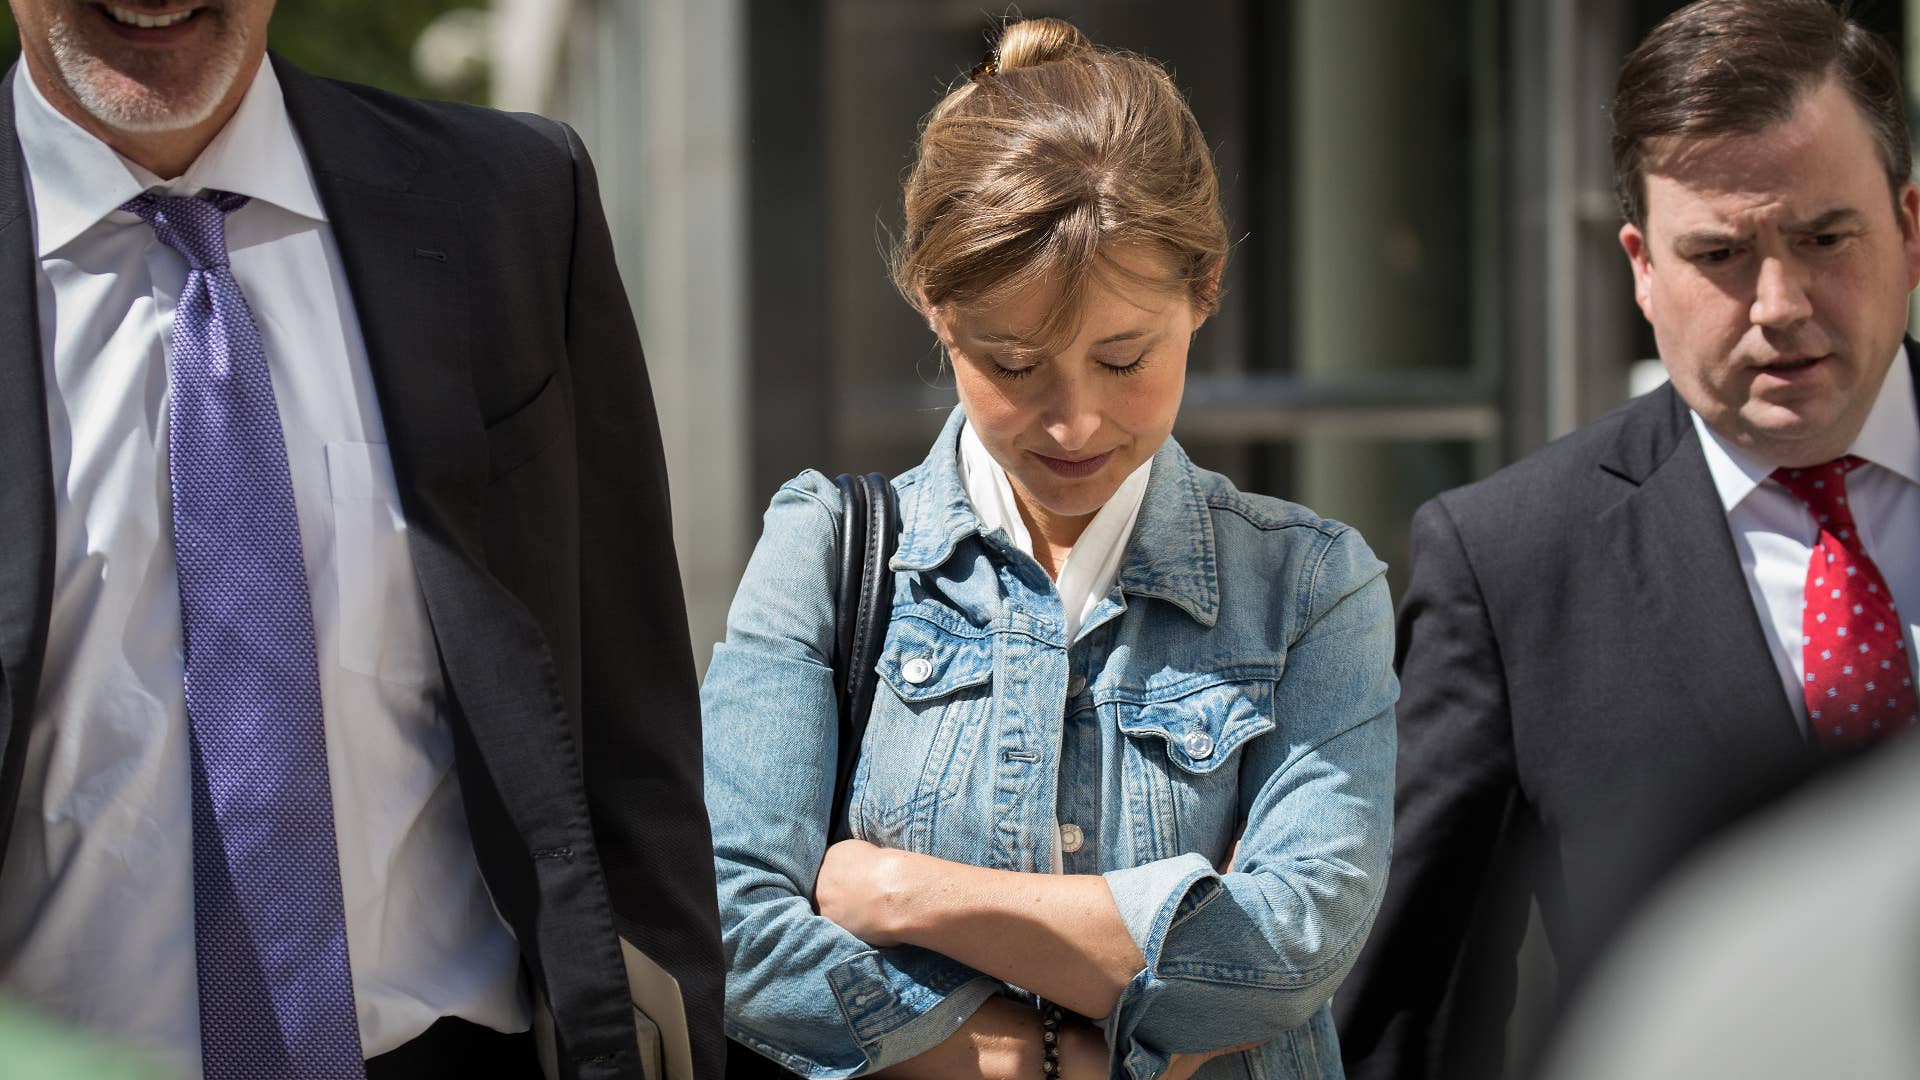 Allison Mack exits the U.S. District Court for the Eastern District of New York.